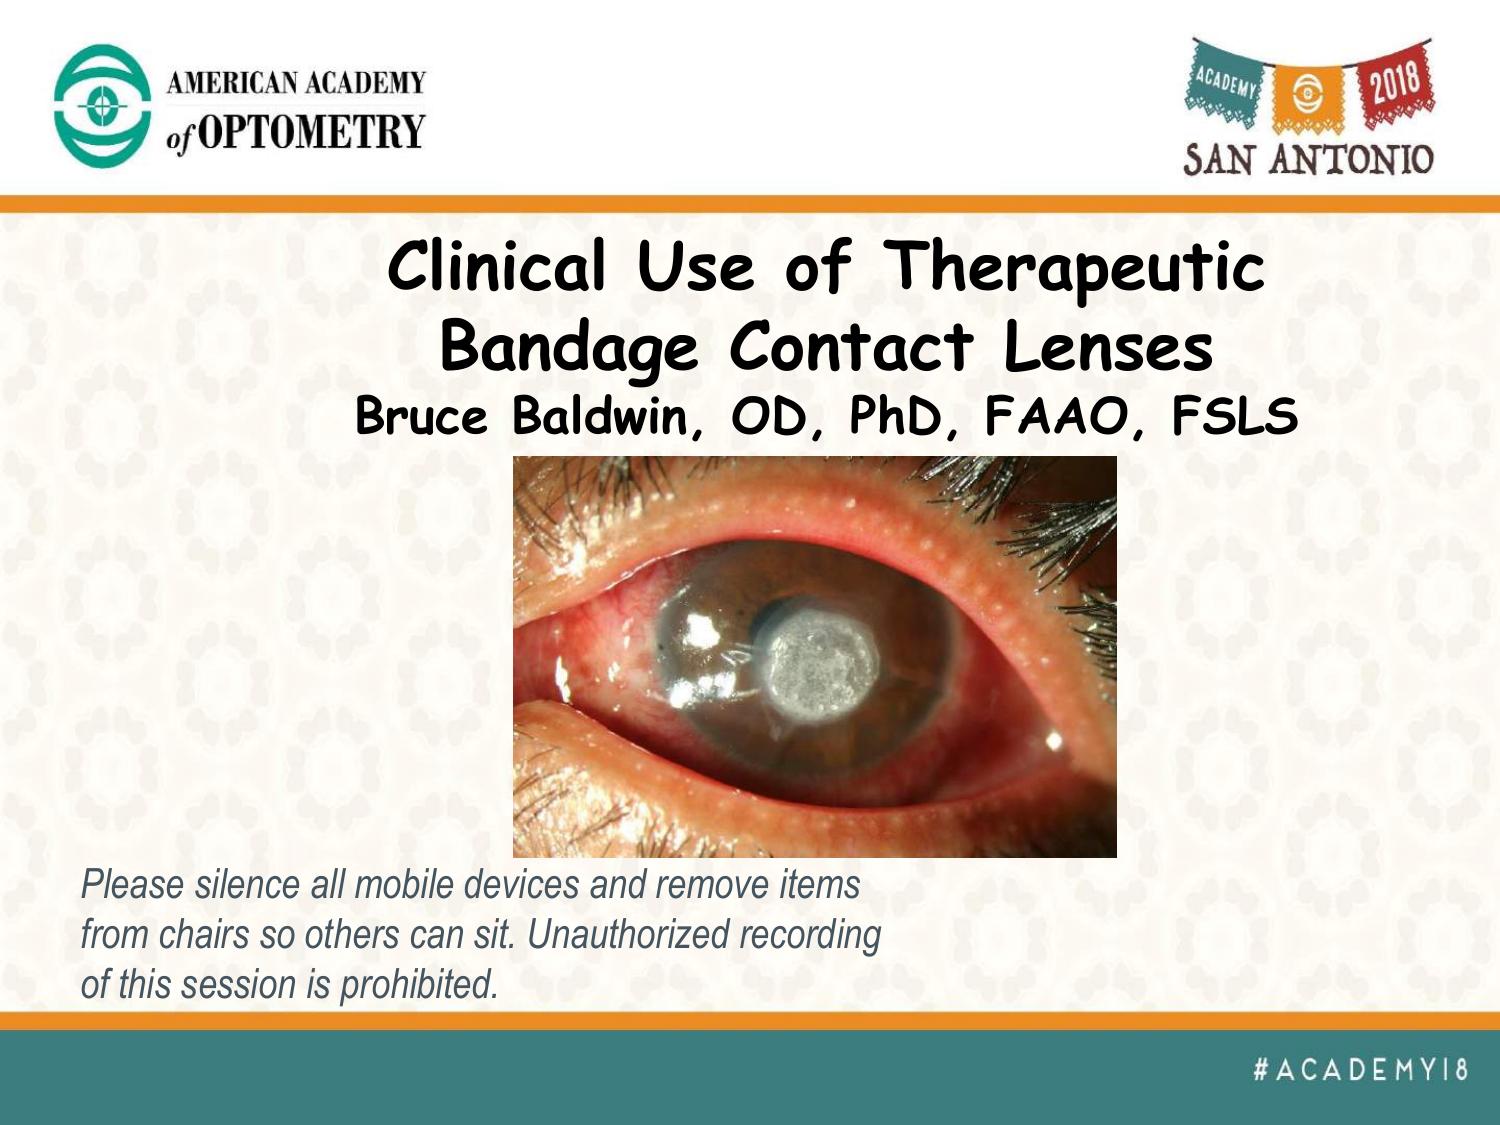 Clinical Use of Therapeutic Bandage Contact Lenses, 2018